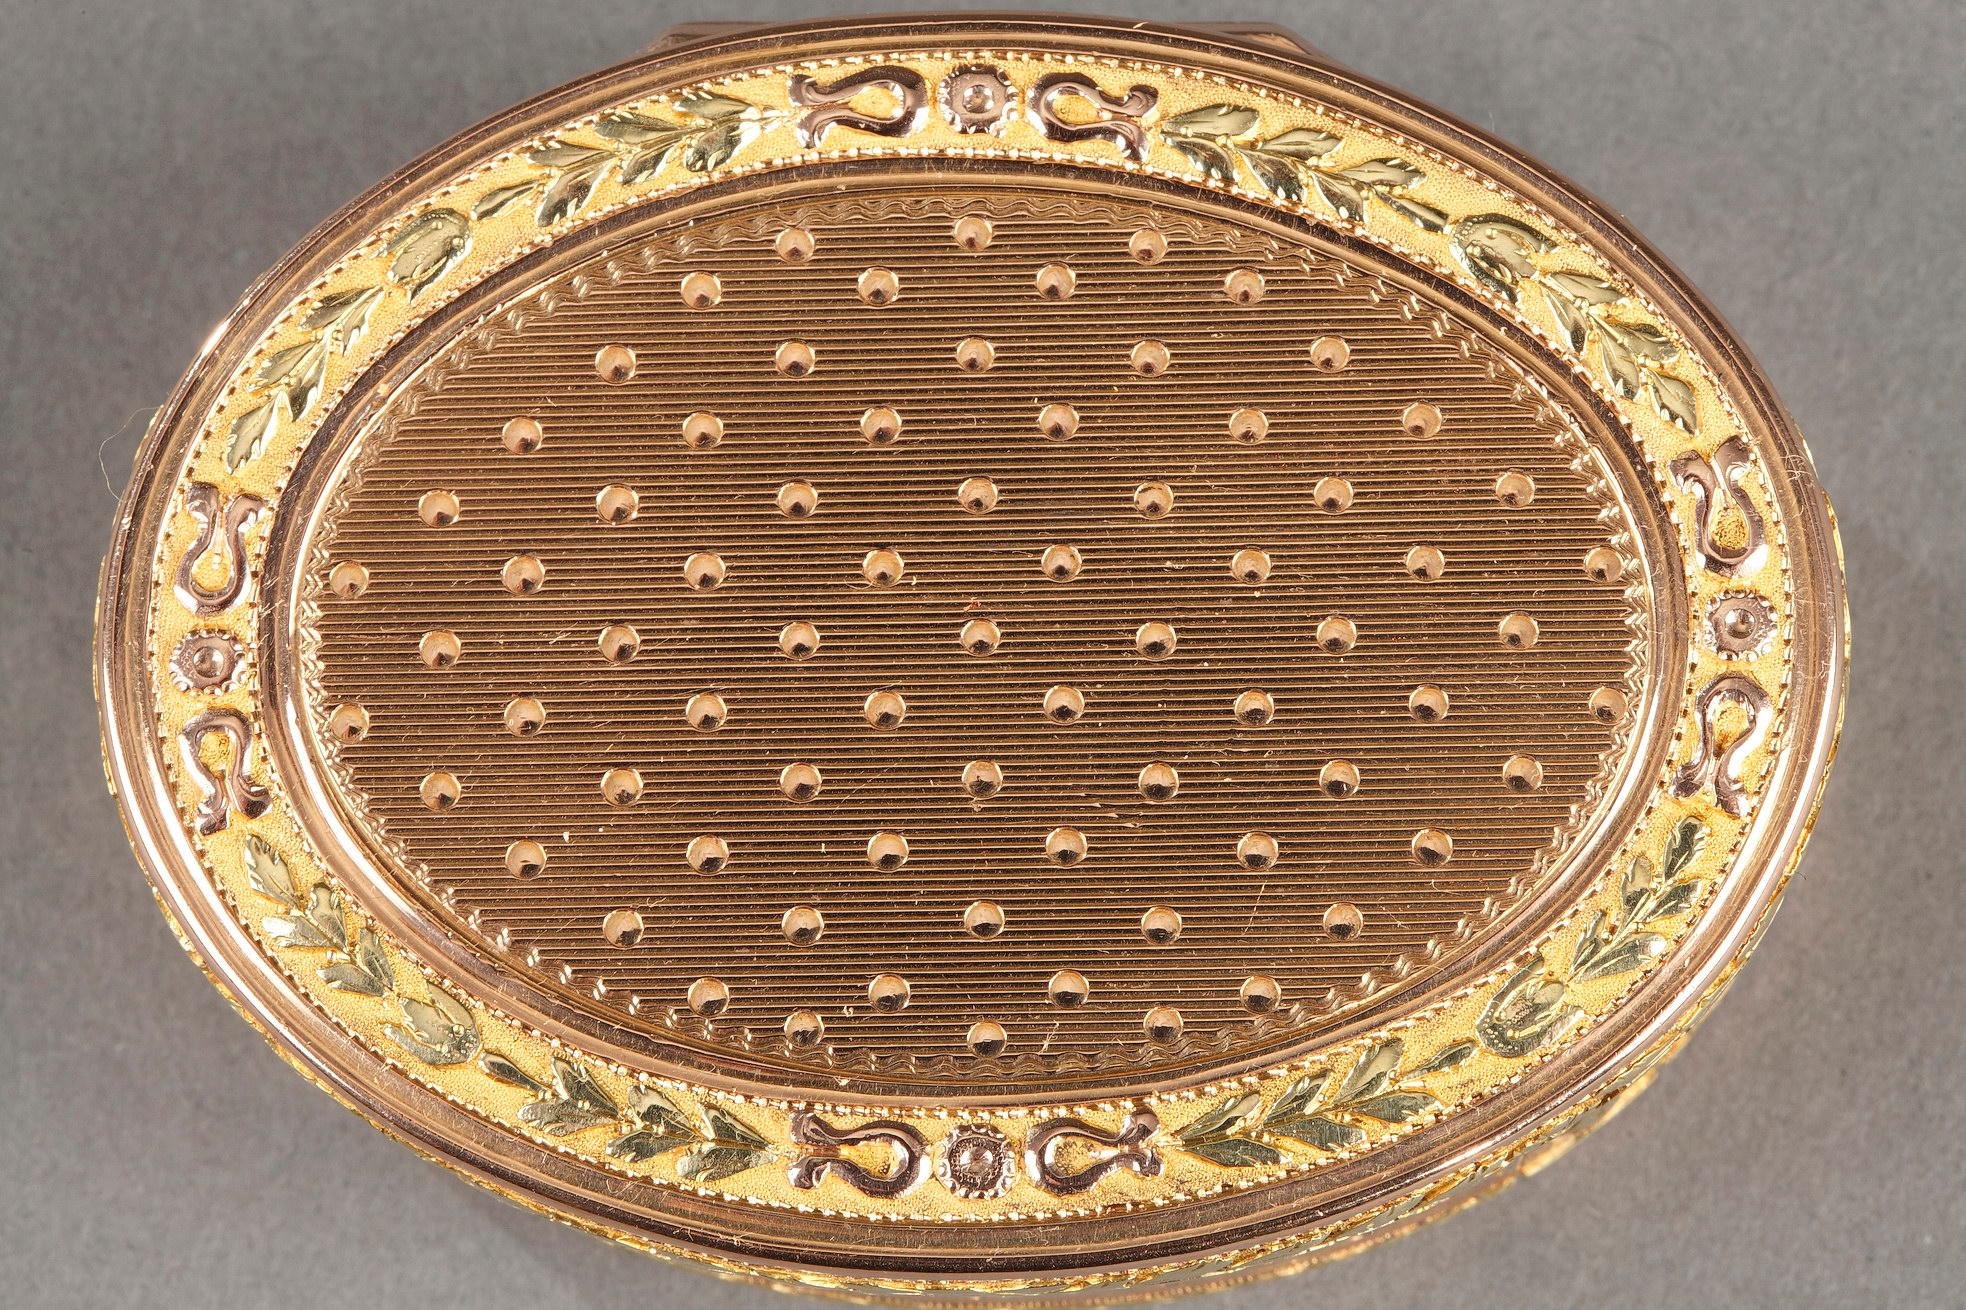 Oval box or snuffbox in gold of several tones. The snuffbox is adorned with a guilloche pattern with parallel stripes and dots on the lid, side and ground. The border is decorated with a stylized laurel wreath frieze on amati background. The box has